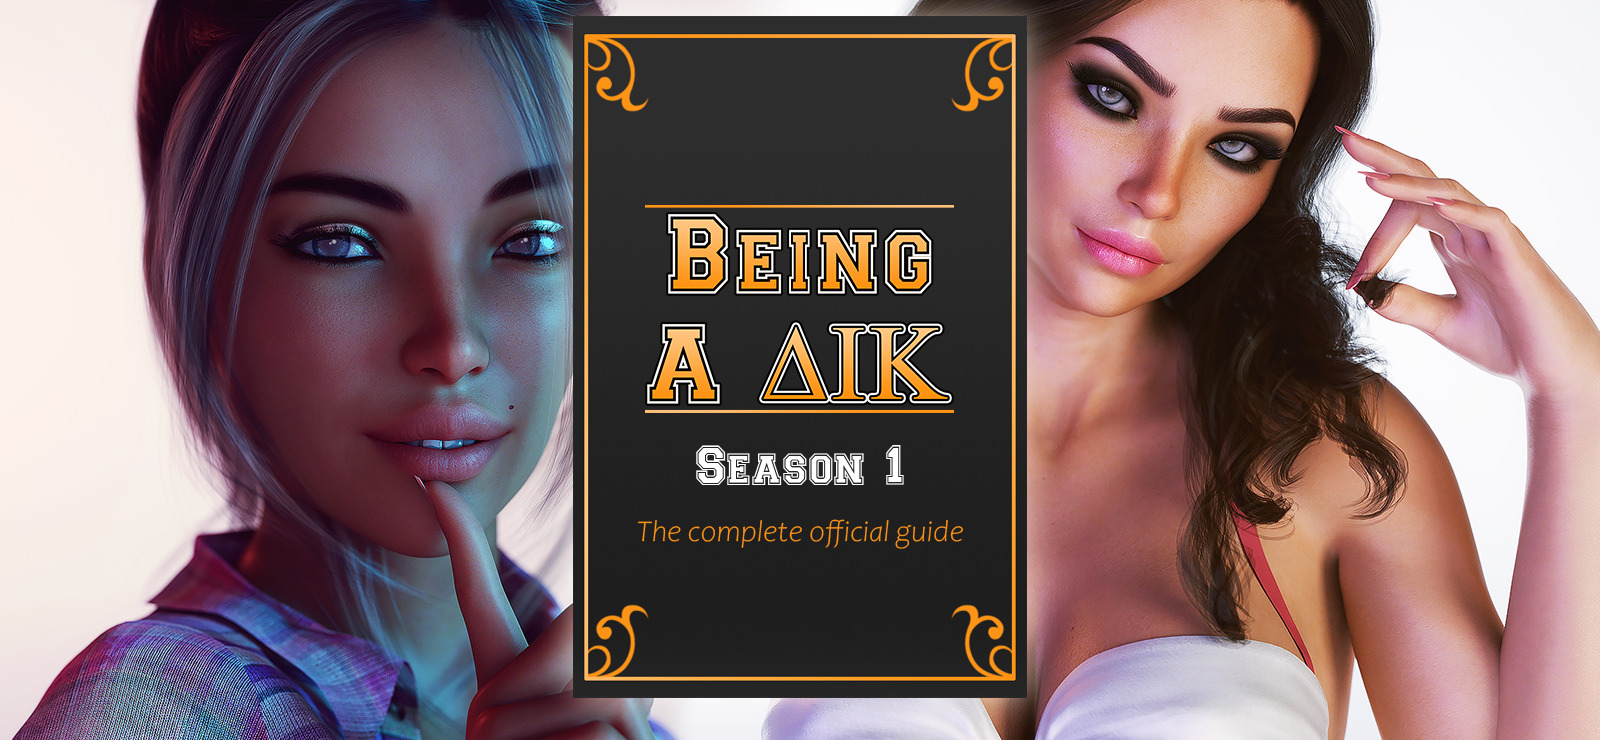 Being a dik season 1 - the complete official guide